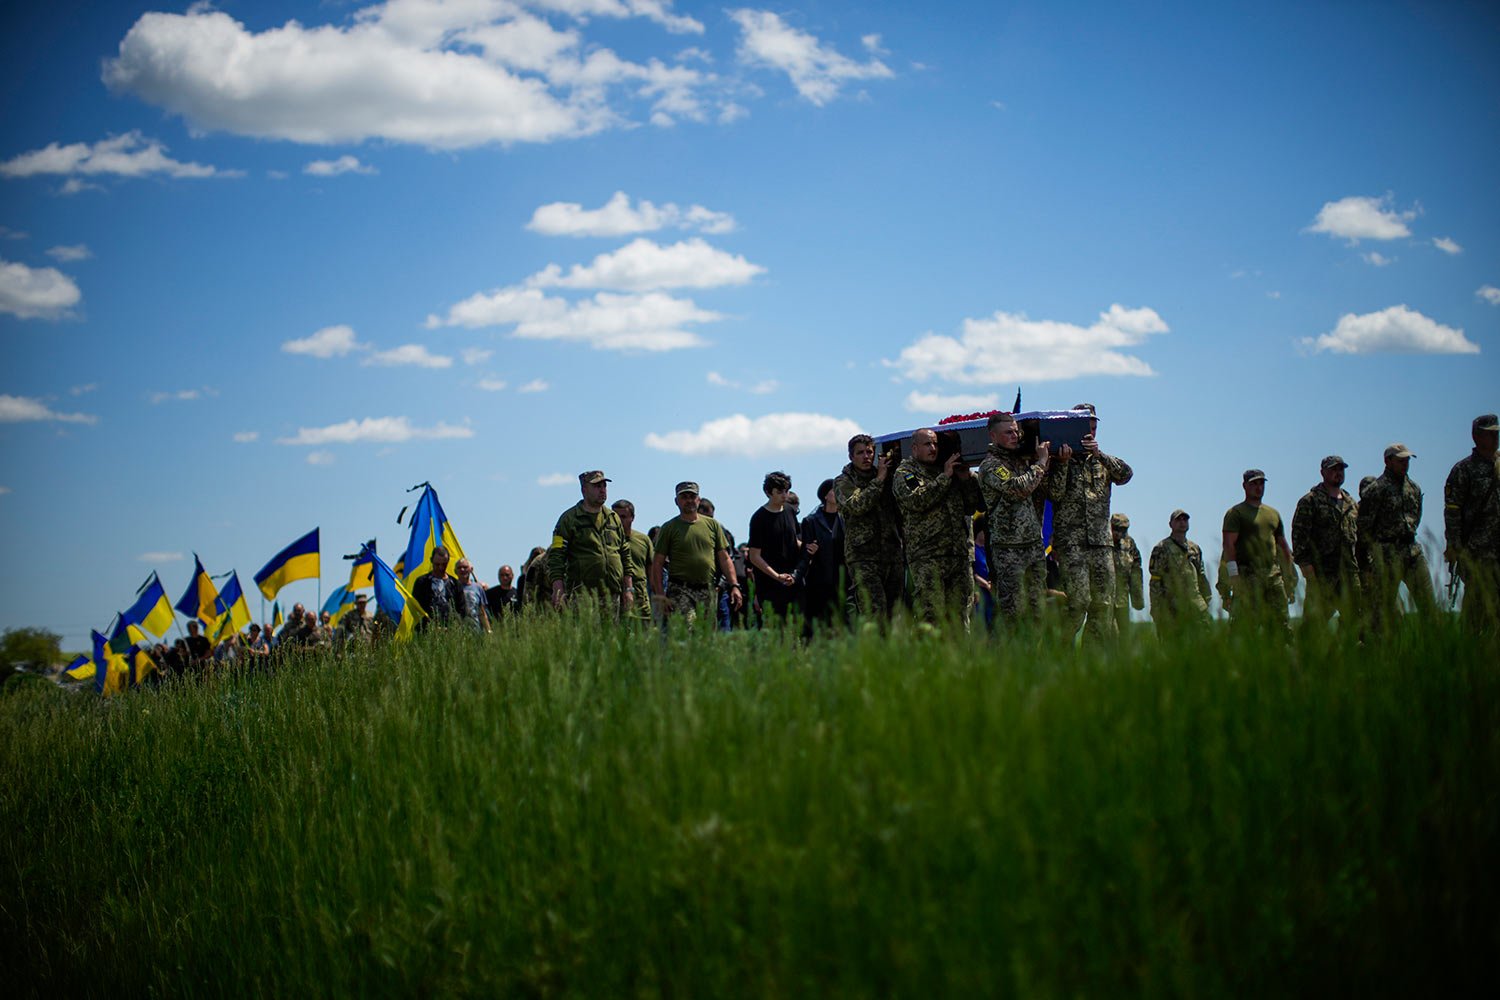  Ukrainian soldiers carry the coffin of Volodymyr Losev, 38, during his funeral in Zorya Truda, Odesa region, Ukraine, Monday, May 16, 2022. Volodymyr Losev, a Ukrainian volunteer soldier, was killed May 7 when the military vehicle he was driving ran